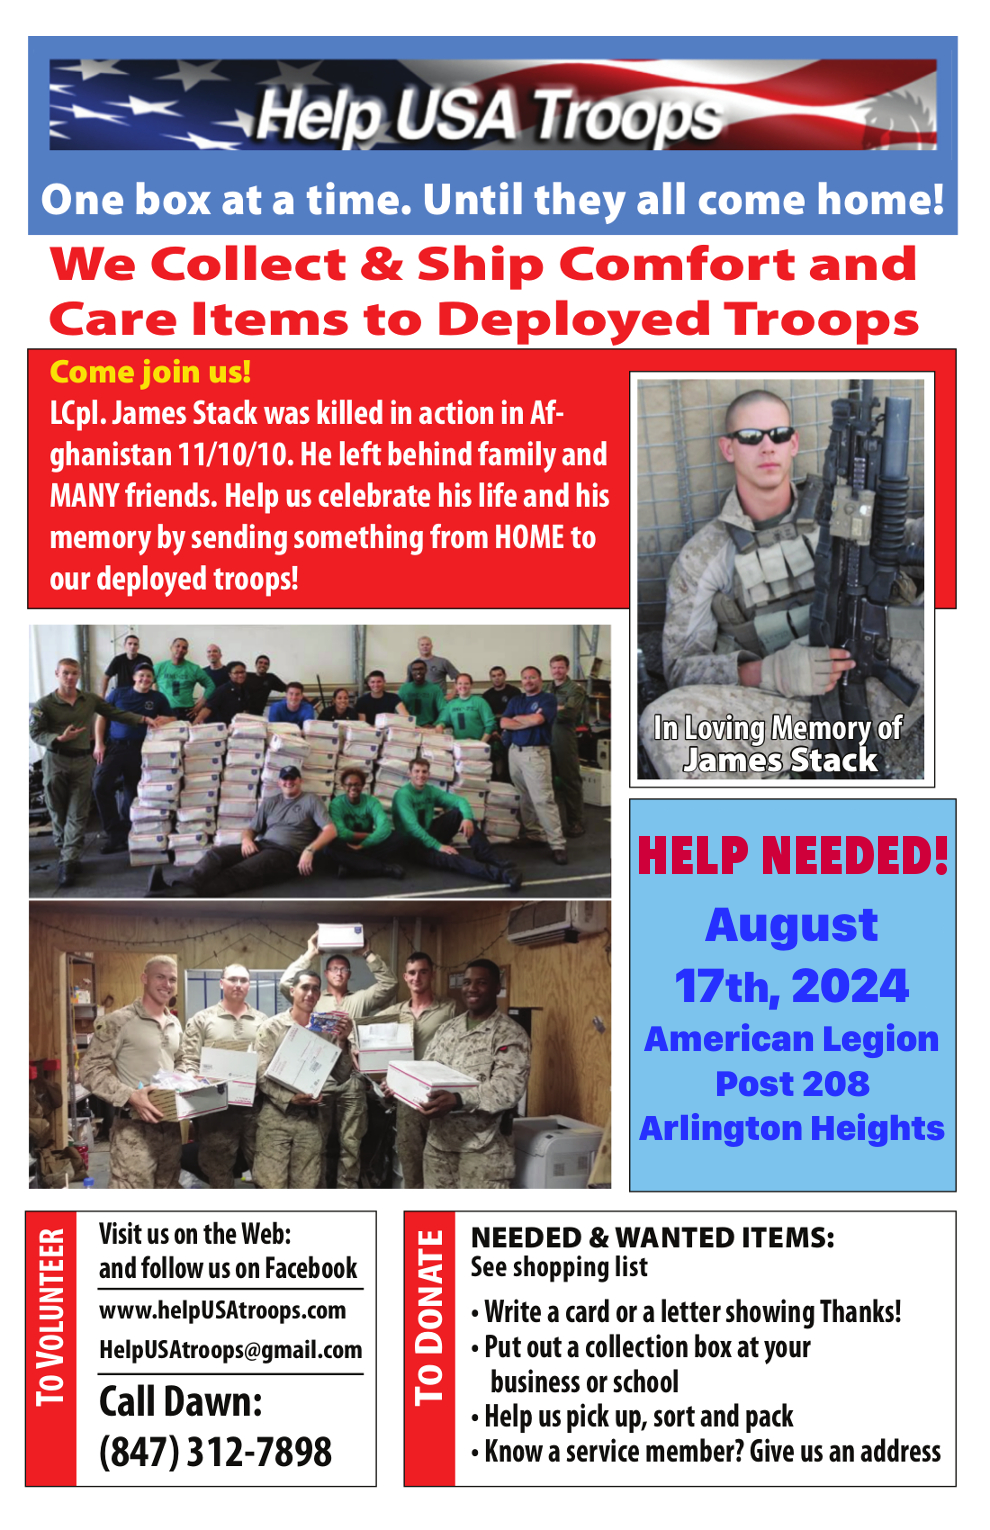 Supporting Our Troops One Box at a Time!